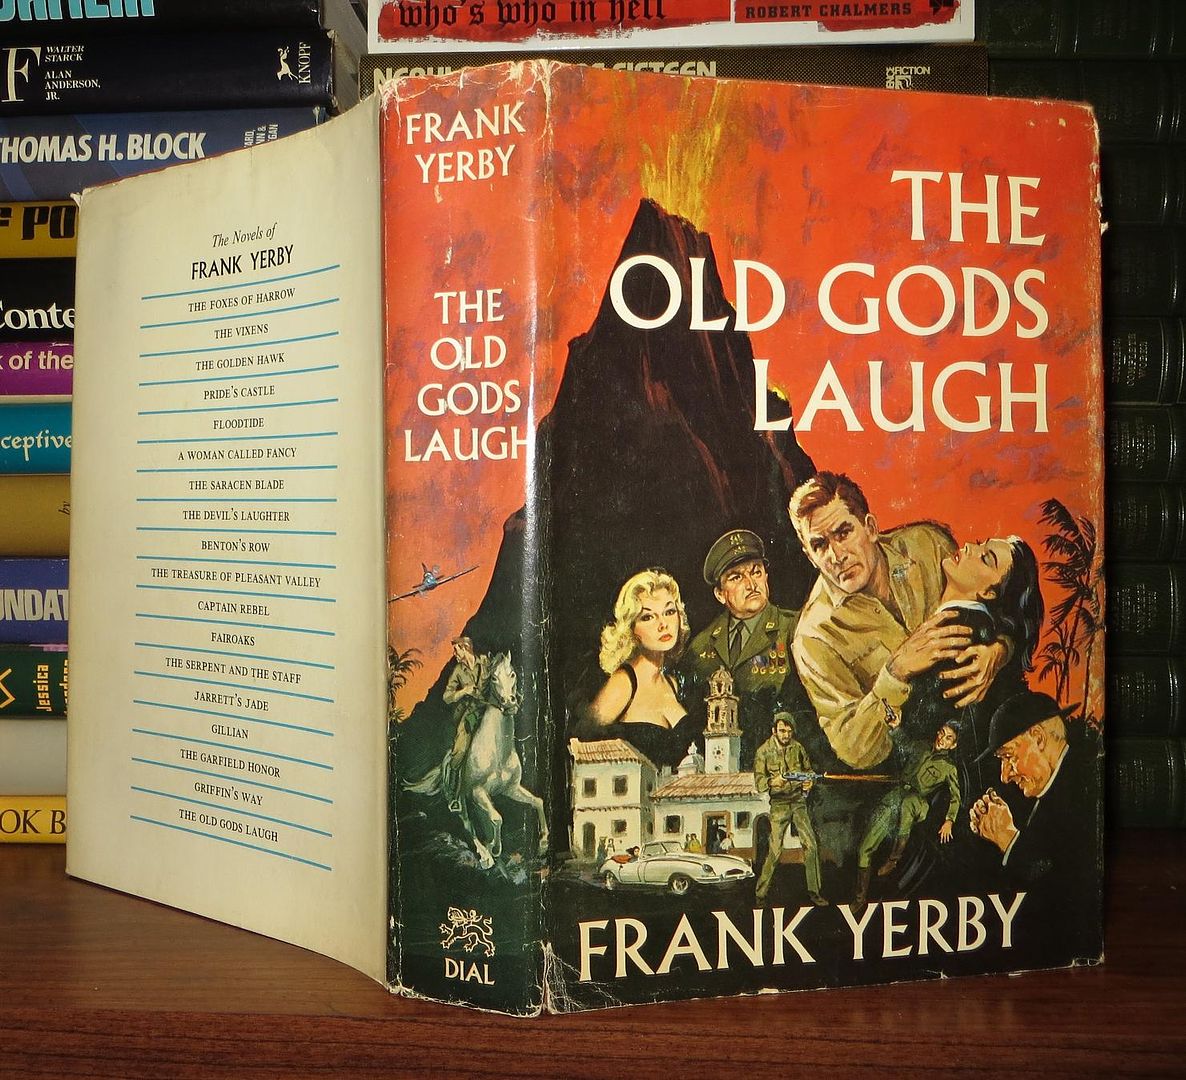 FRANK YERBY - The Old Gods Laugh